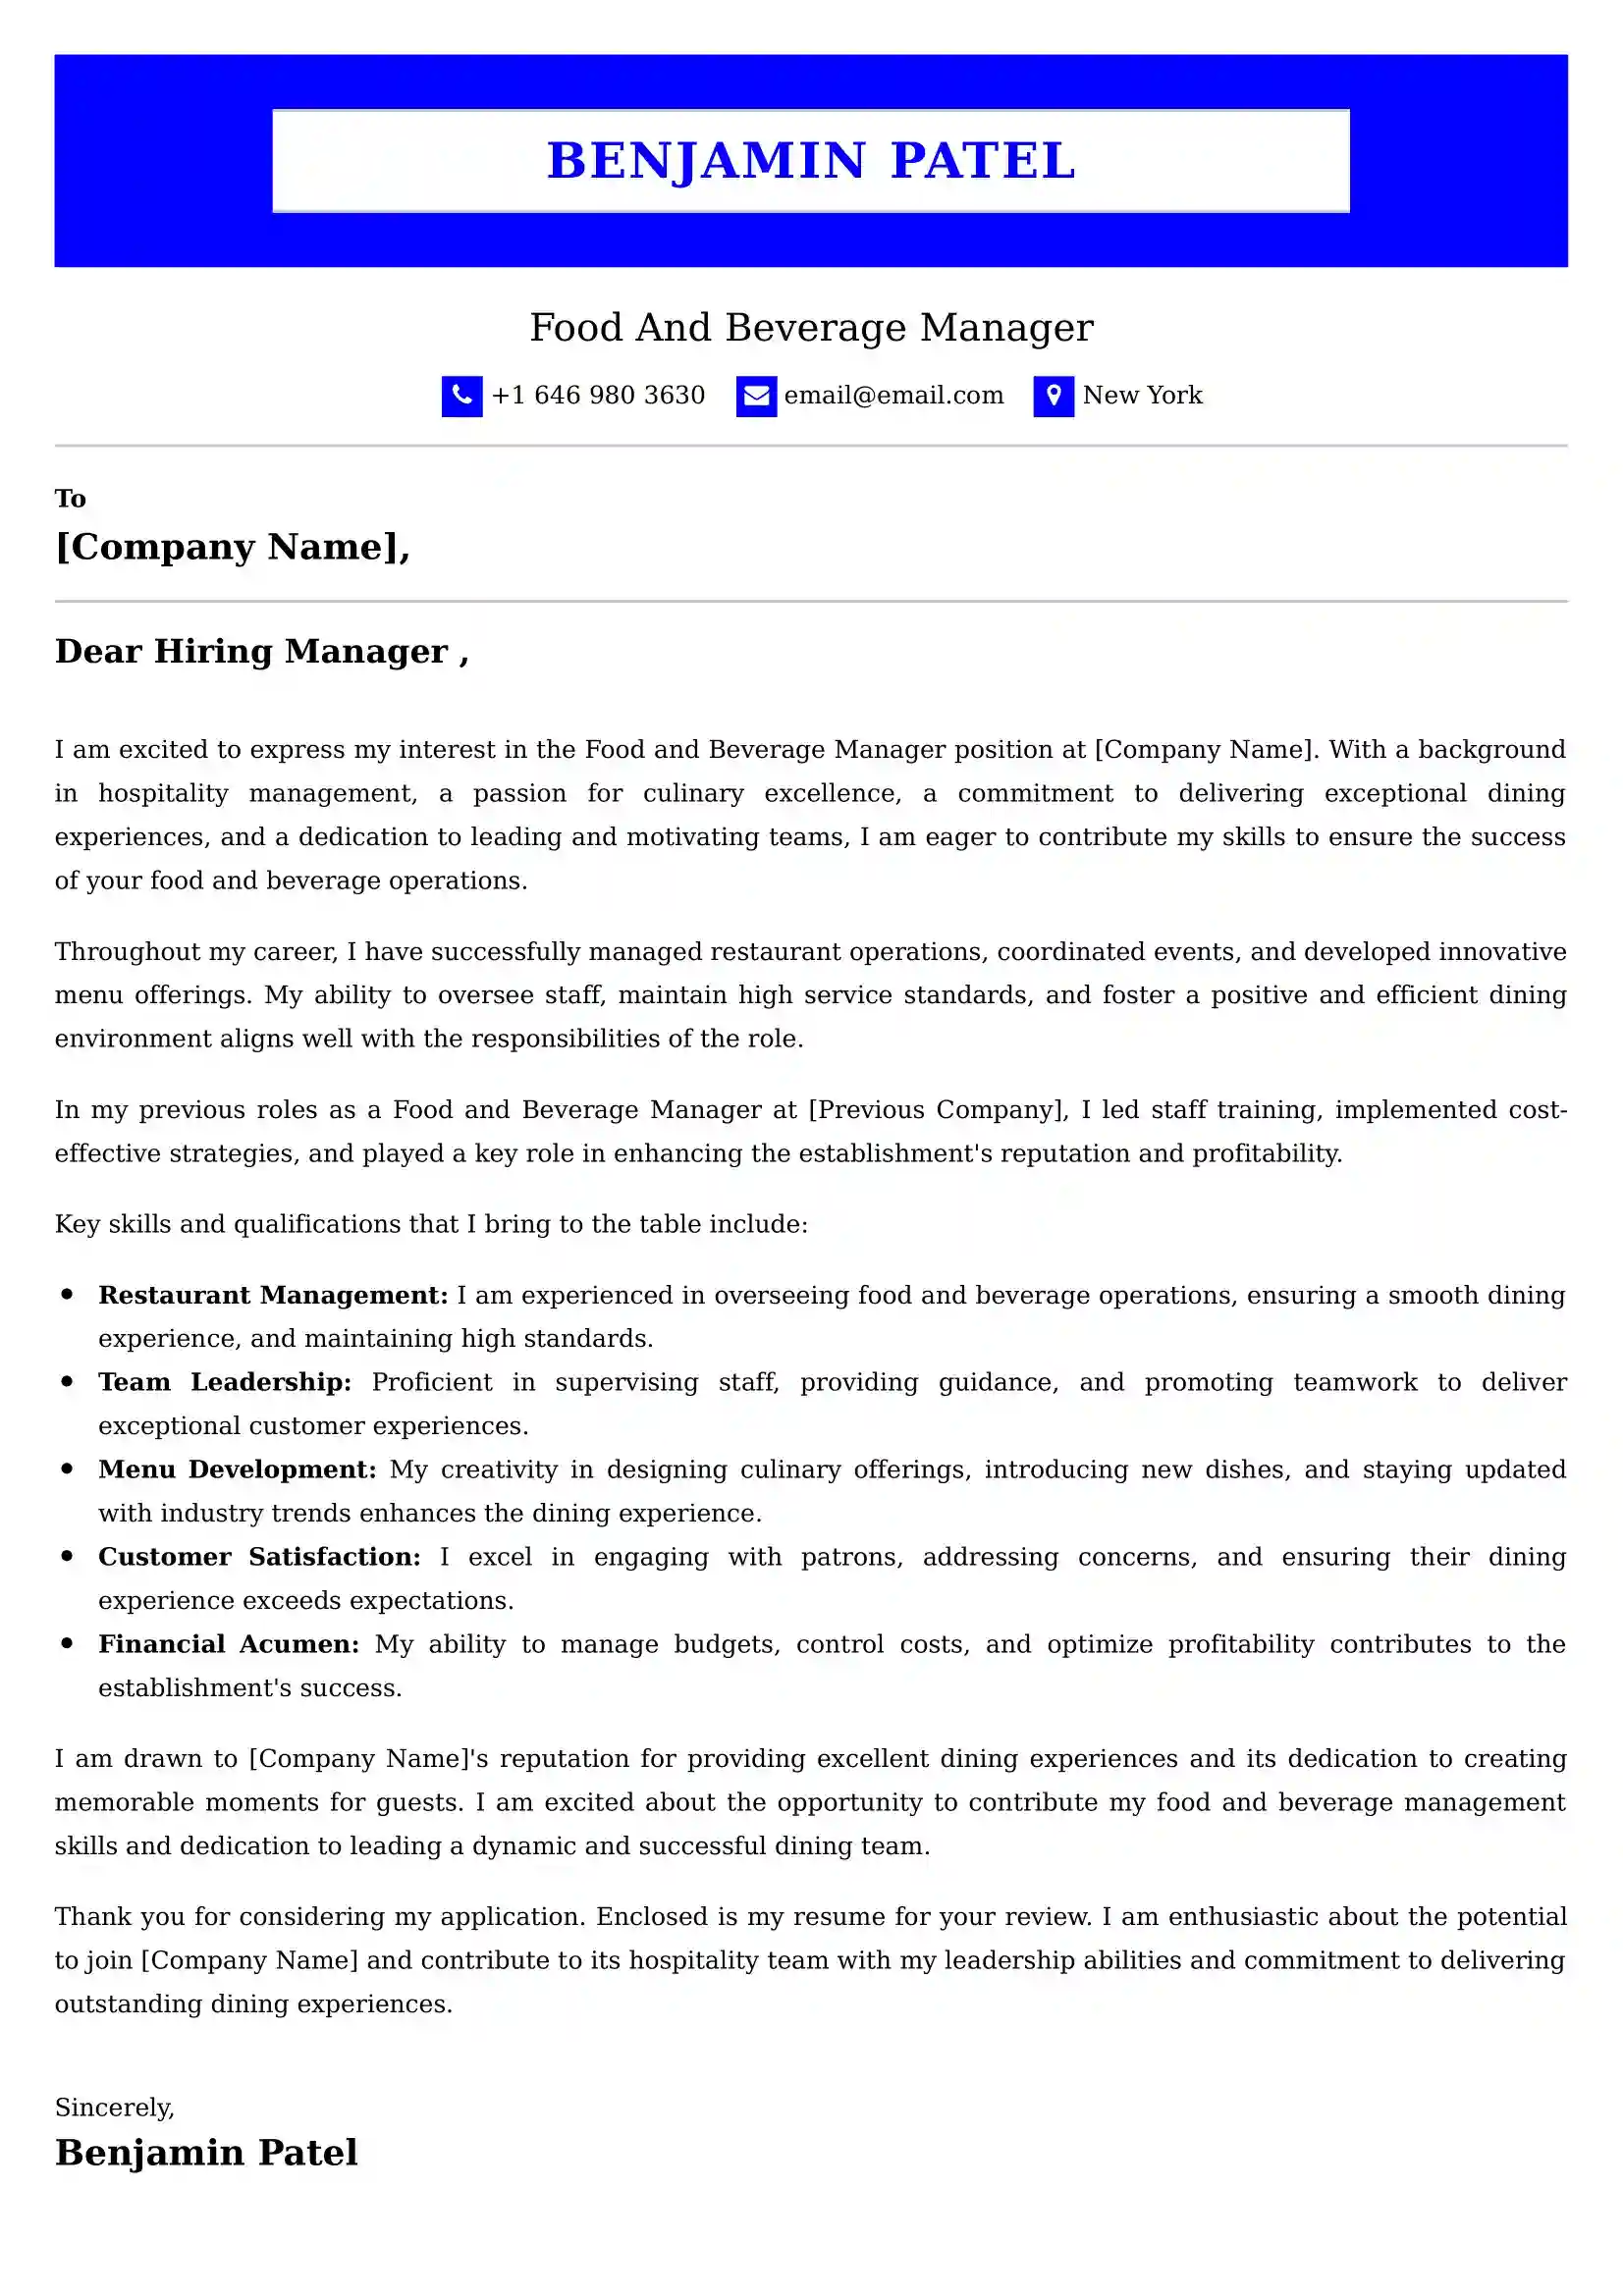 Food And Beverage Manager Cover Letter Samples Malaysia